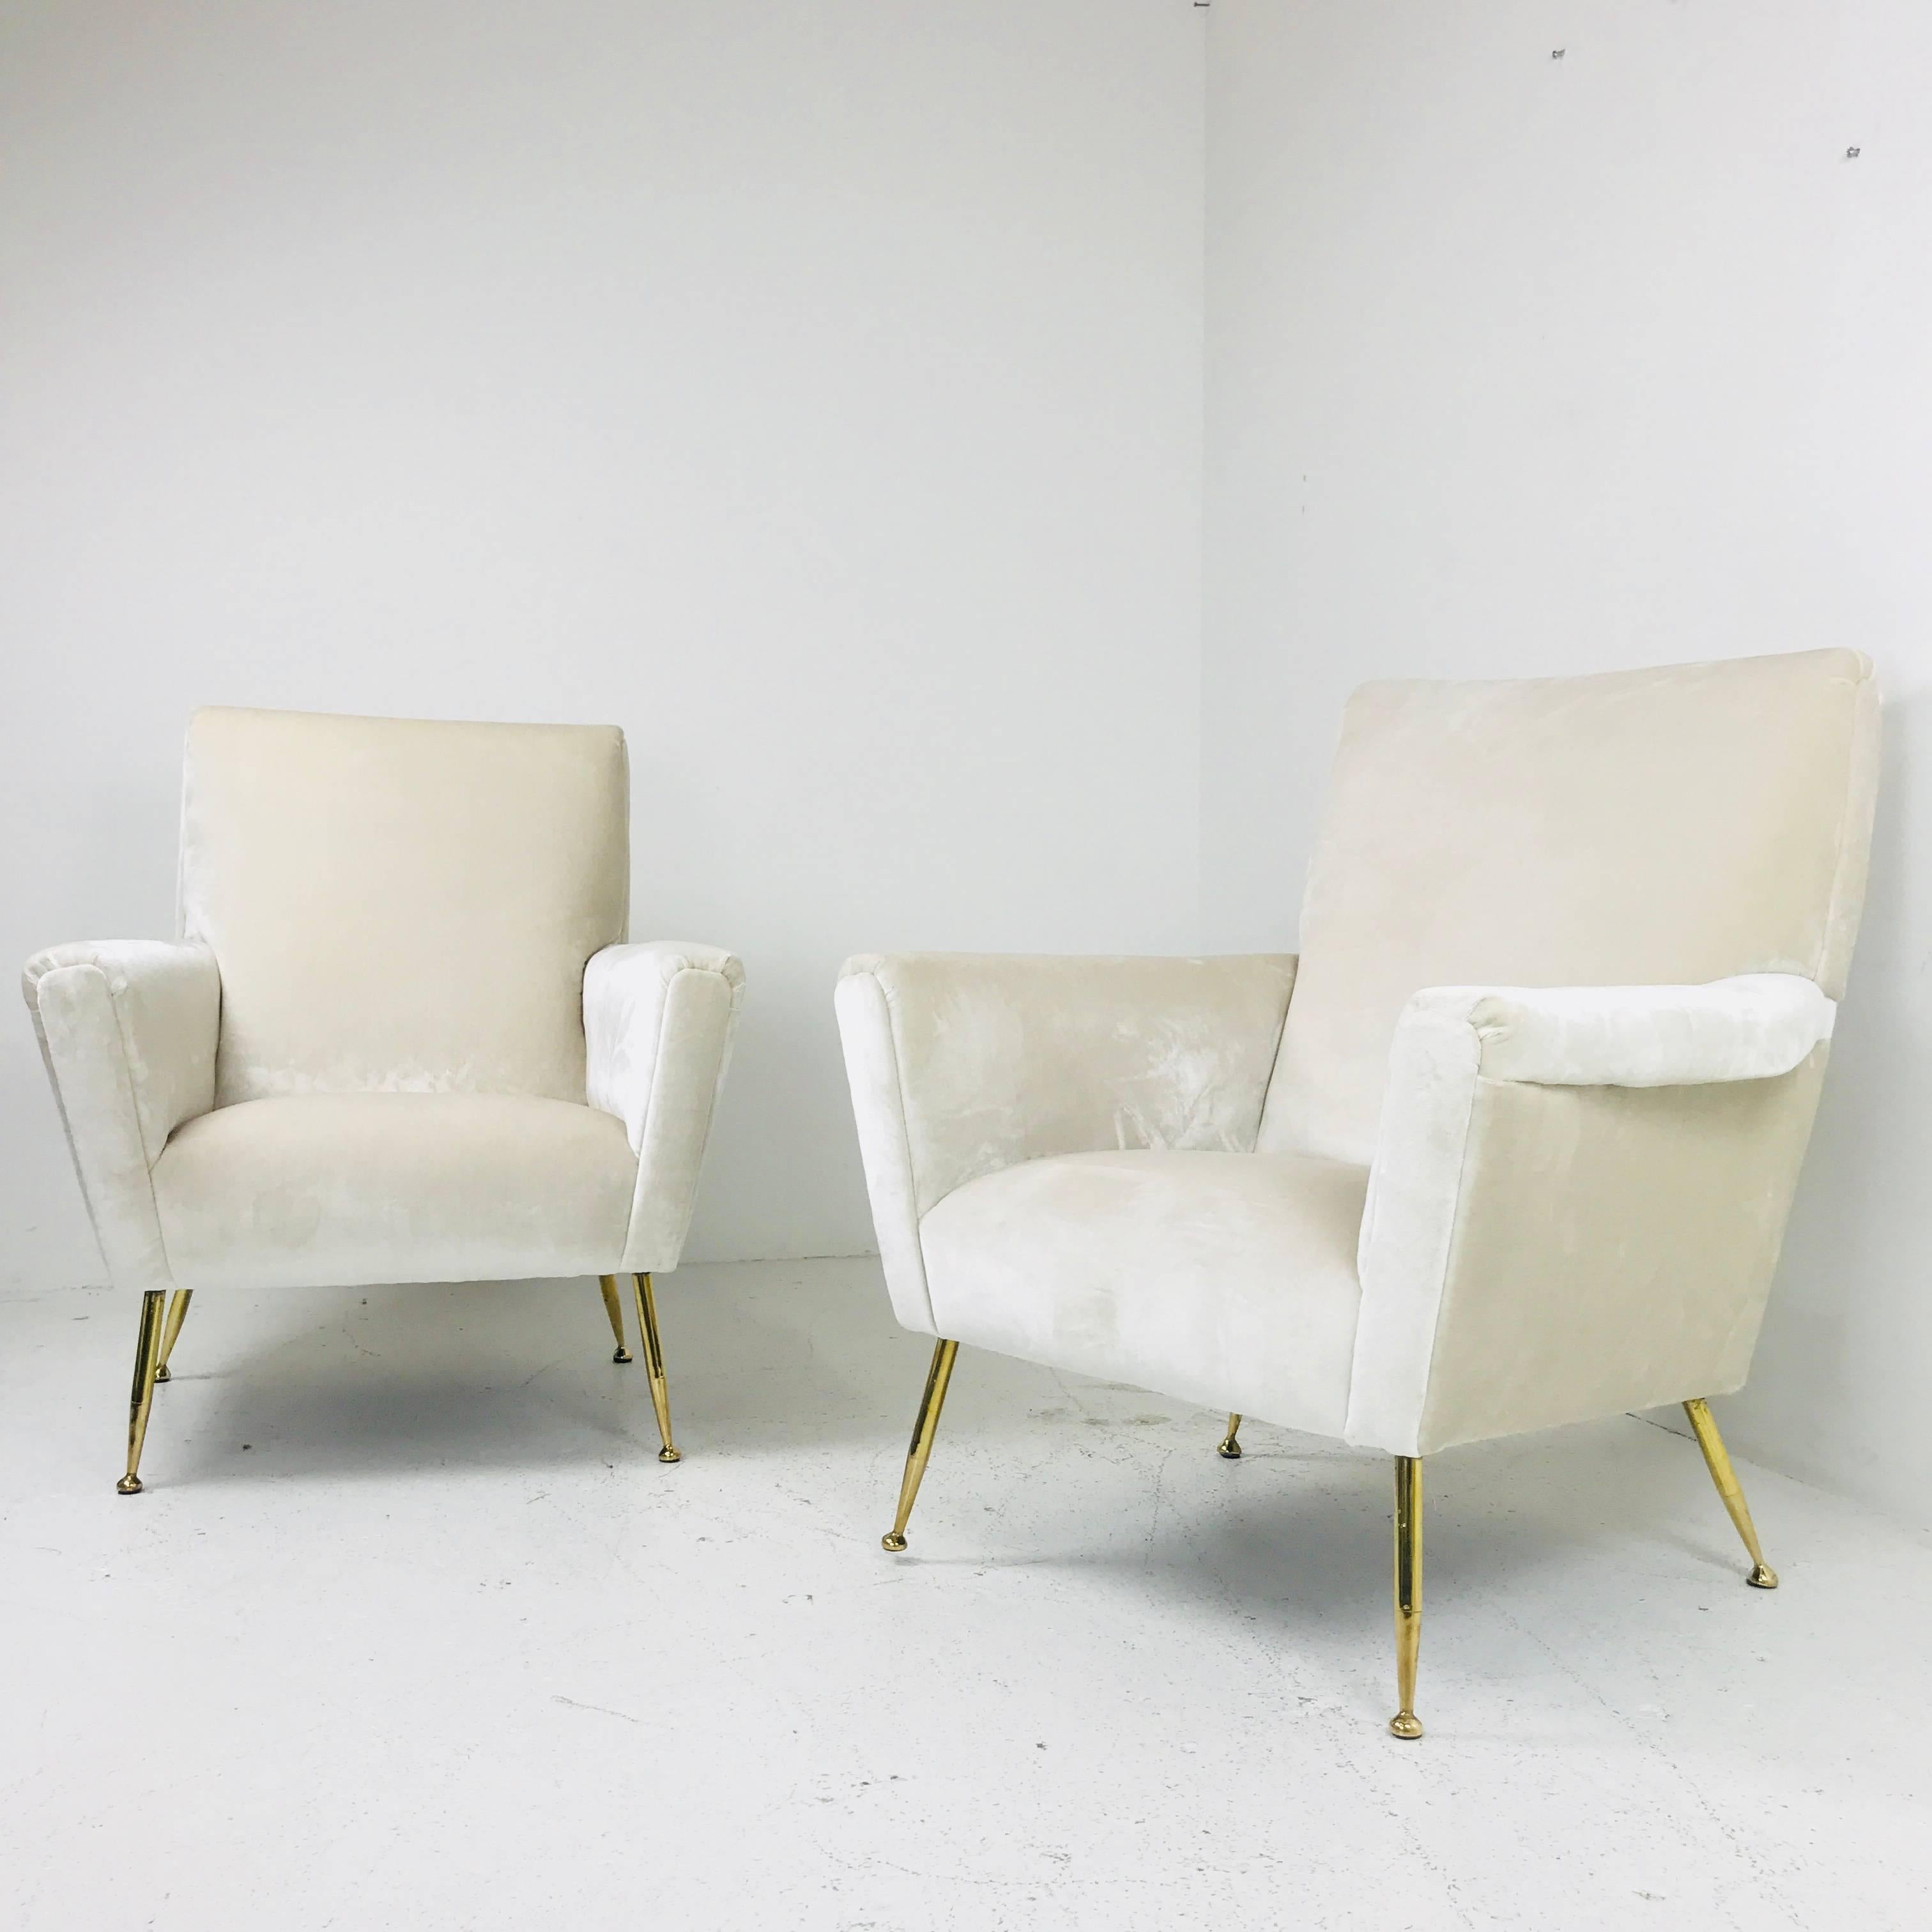 Pair of vintage Italian lounge chairs. Newly upholstered in a cream colored velvet. There is visible wear on the legs finish and recommenced refinishing.

dimensions: 33